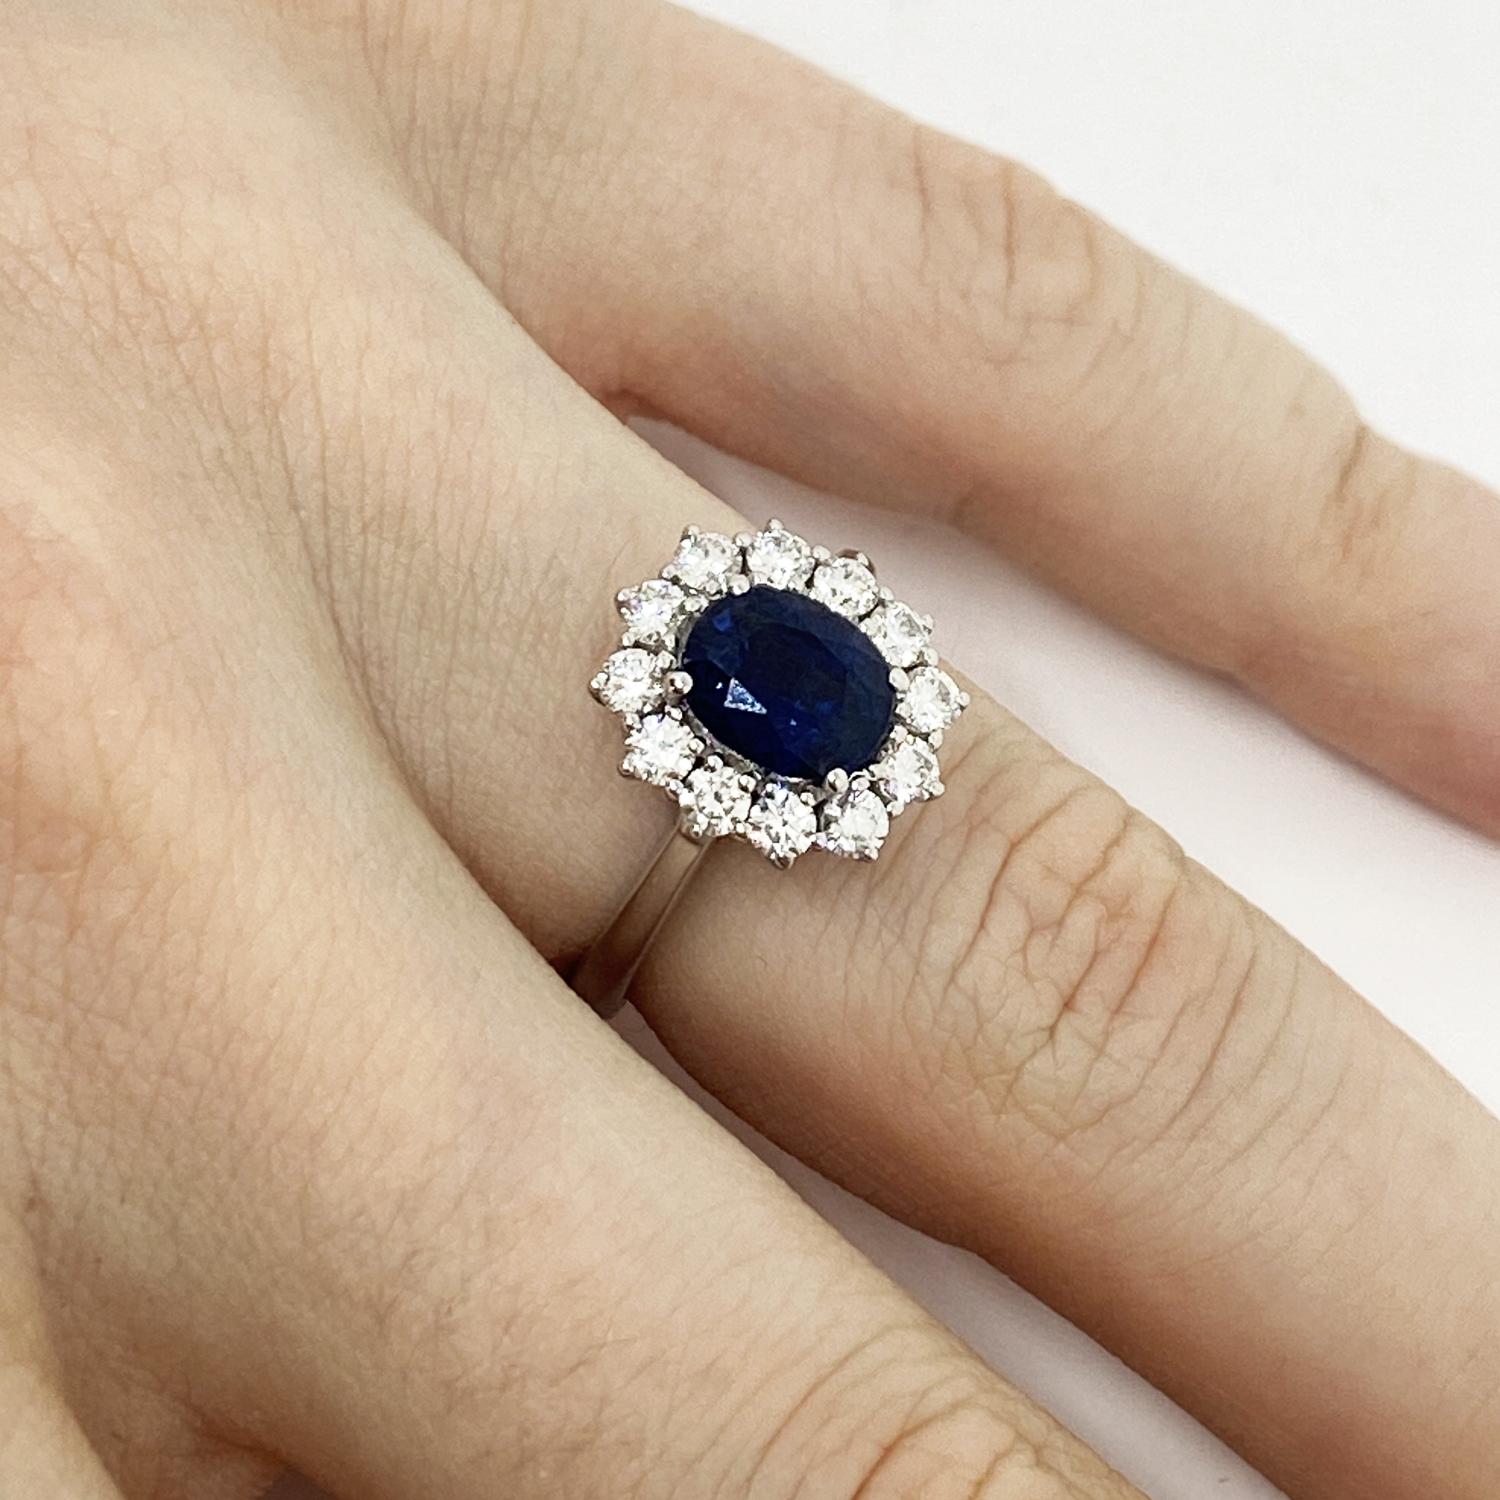 Ring made of 18 kt white gold with central oval-cut natural sapphire for ct.1.62 and natural white brilliant-cut diamonds for ct.0.63
-------------------------------------------------

Important Note : In order to speed up the publishing process of